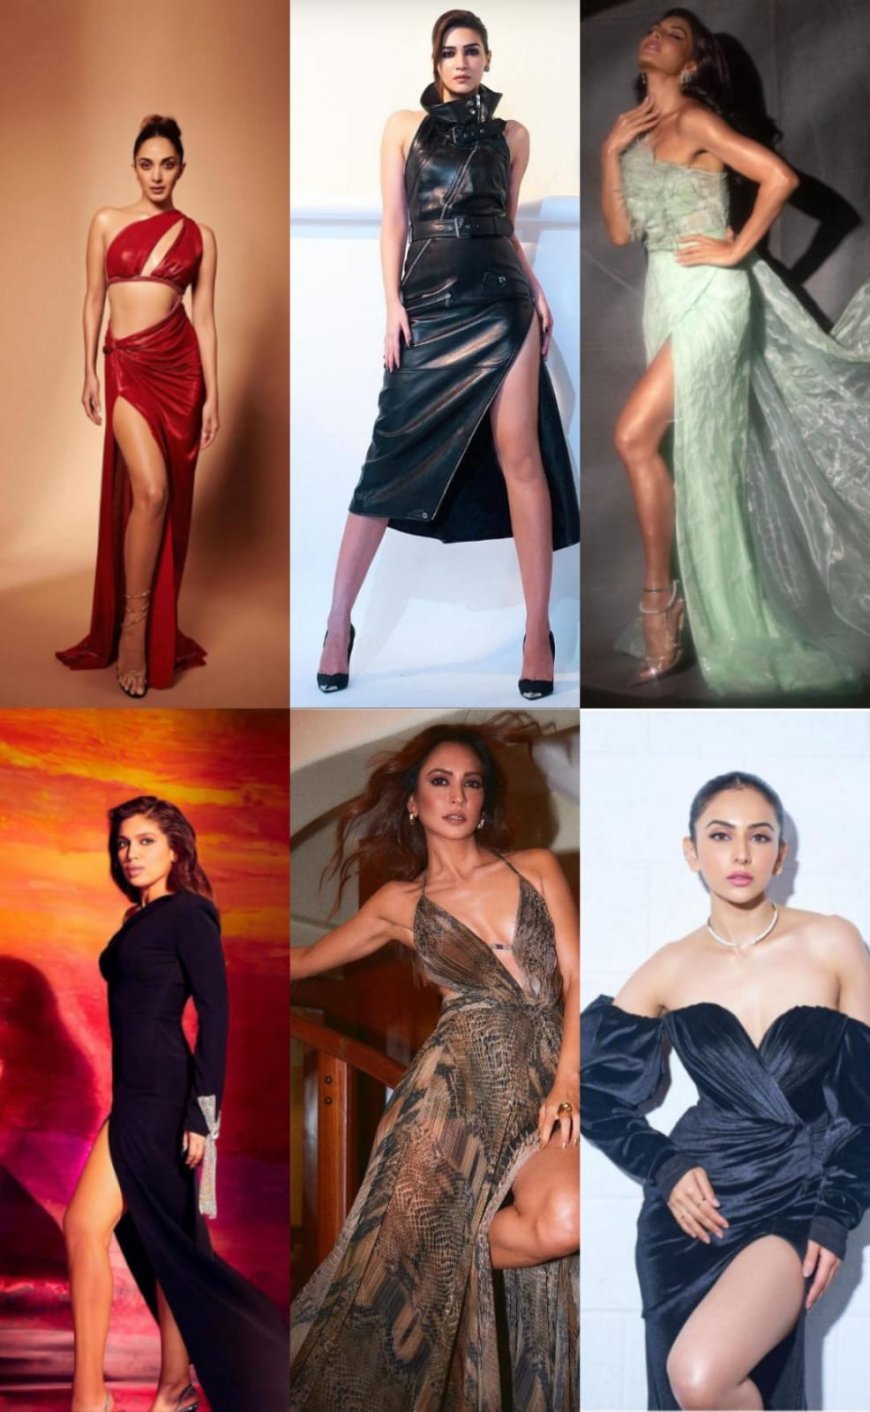 ACTRESSES WHO SLAYED THE THIGH-HIGH SLIT DRESS TREND